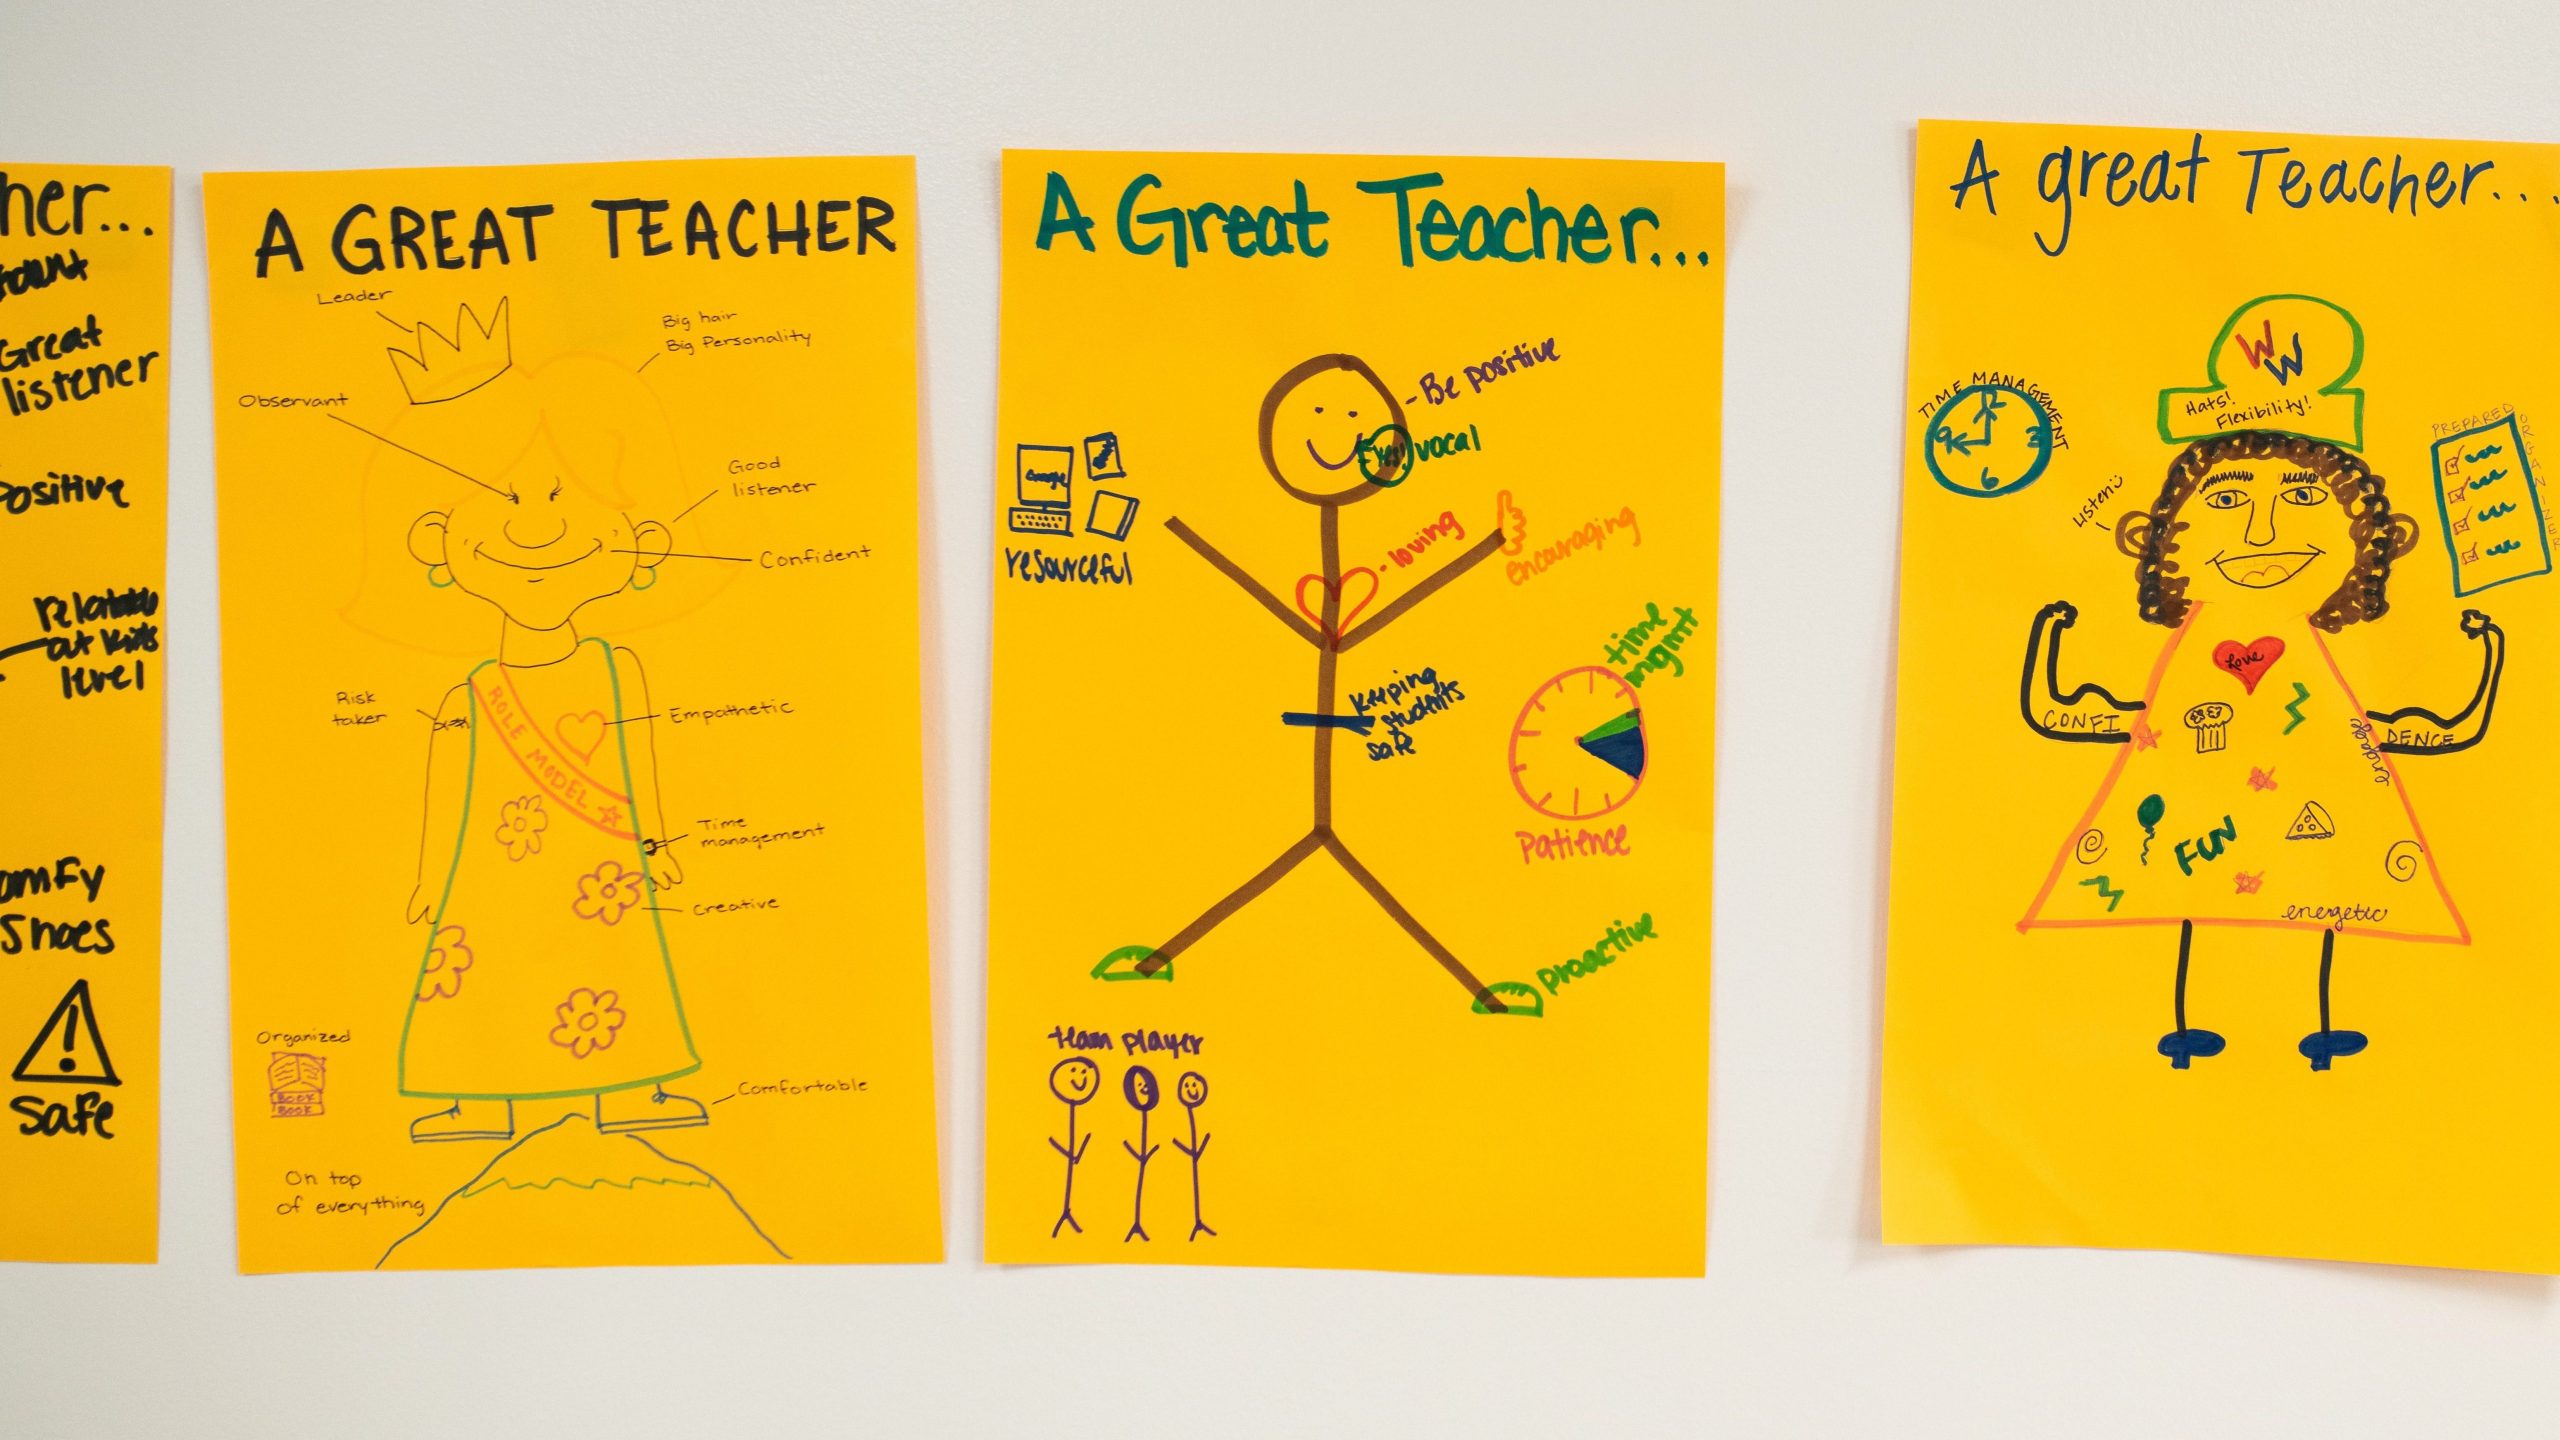 Three posters of what a great teacher represents. 